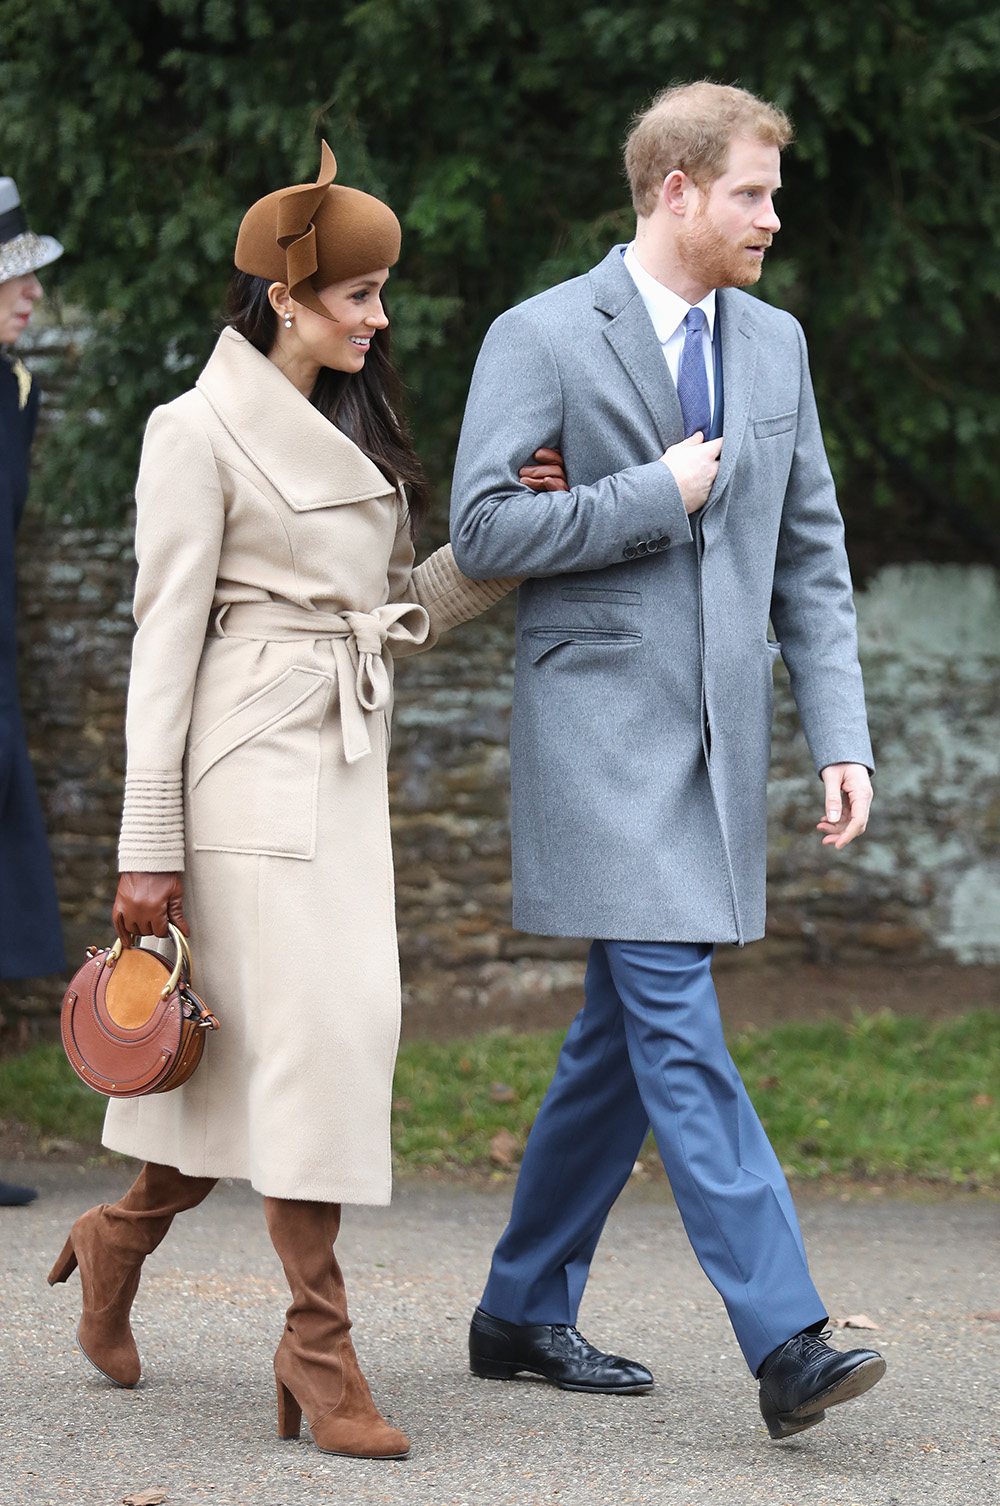 December 25, 2017: Meghan and Prince Harry attend Christmas Day Church service at Church of St Mary Magdalene in King's Lynn, England.Meghan wears a camel Sentaler coat, small brown Chloé bag, Stuart Weitzman boots, Birks diamond snowflake earrings and Philip Treacy hat